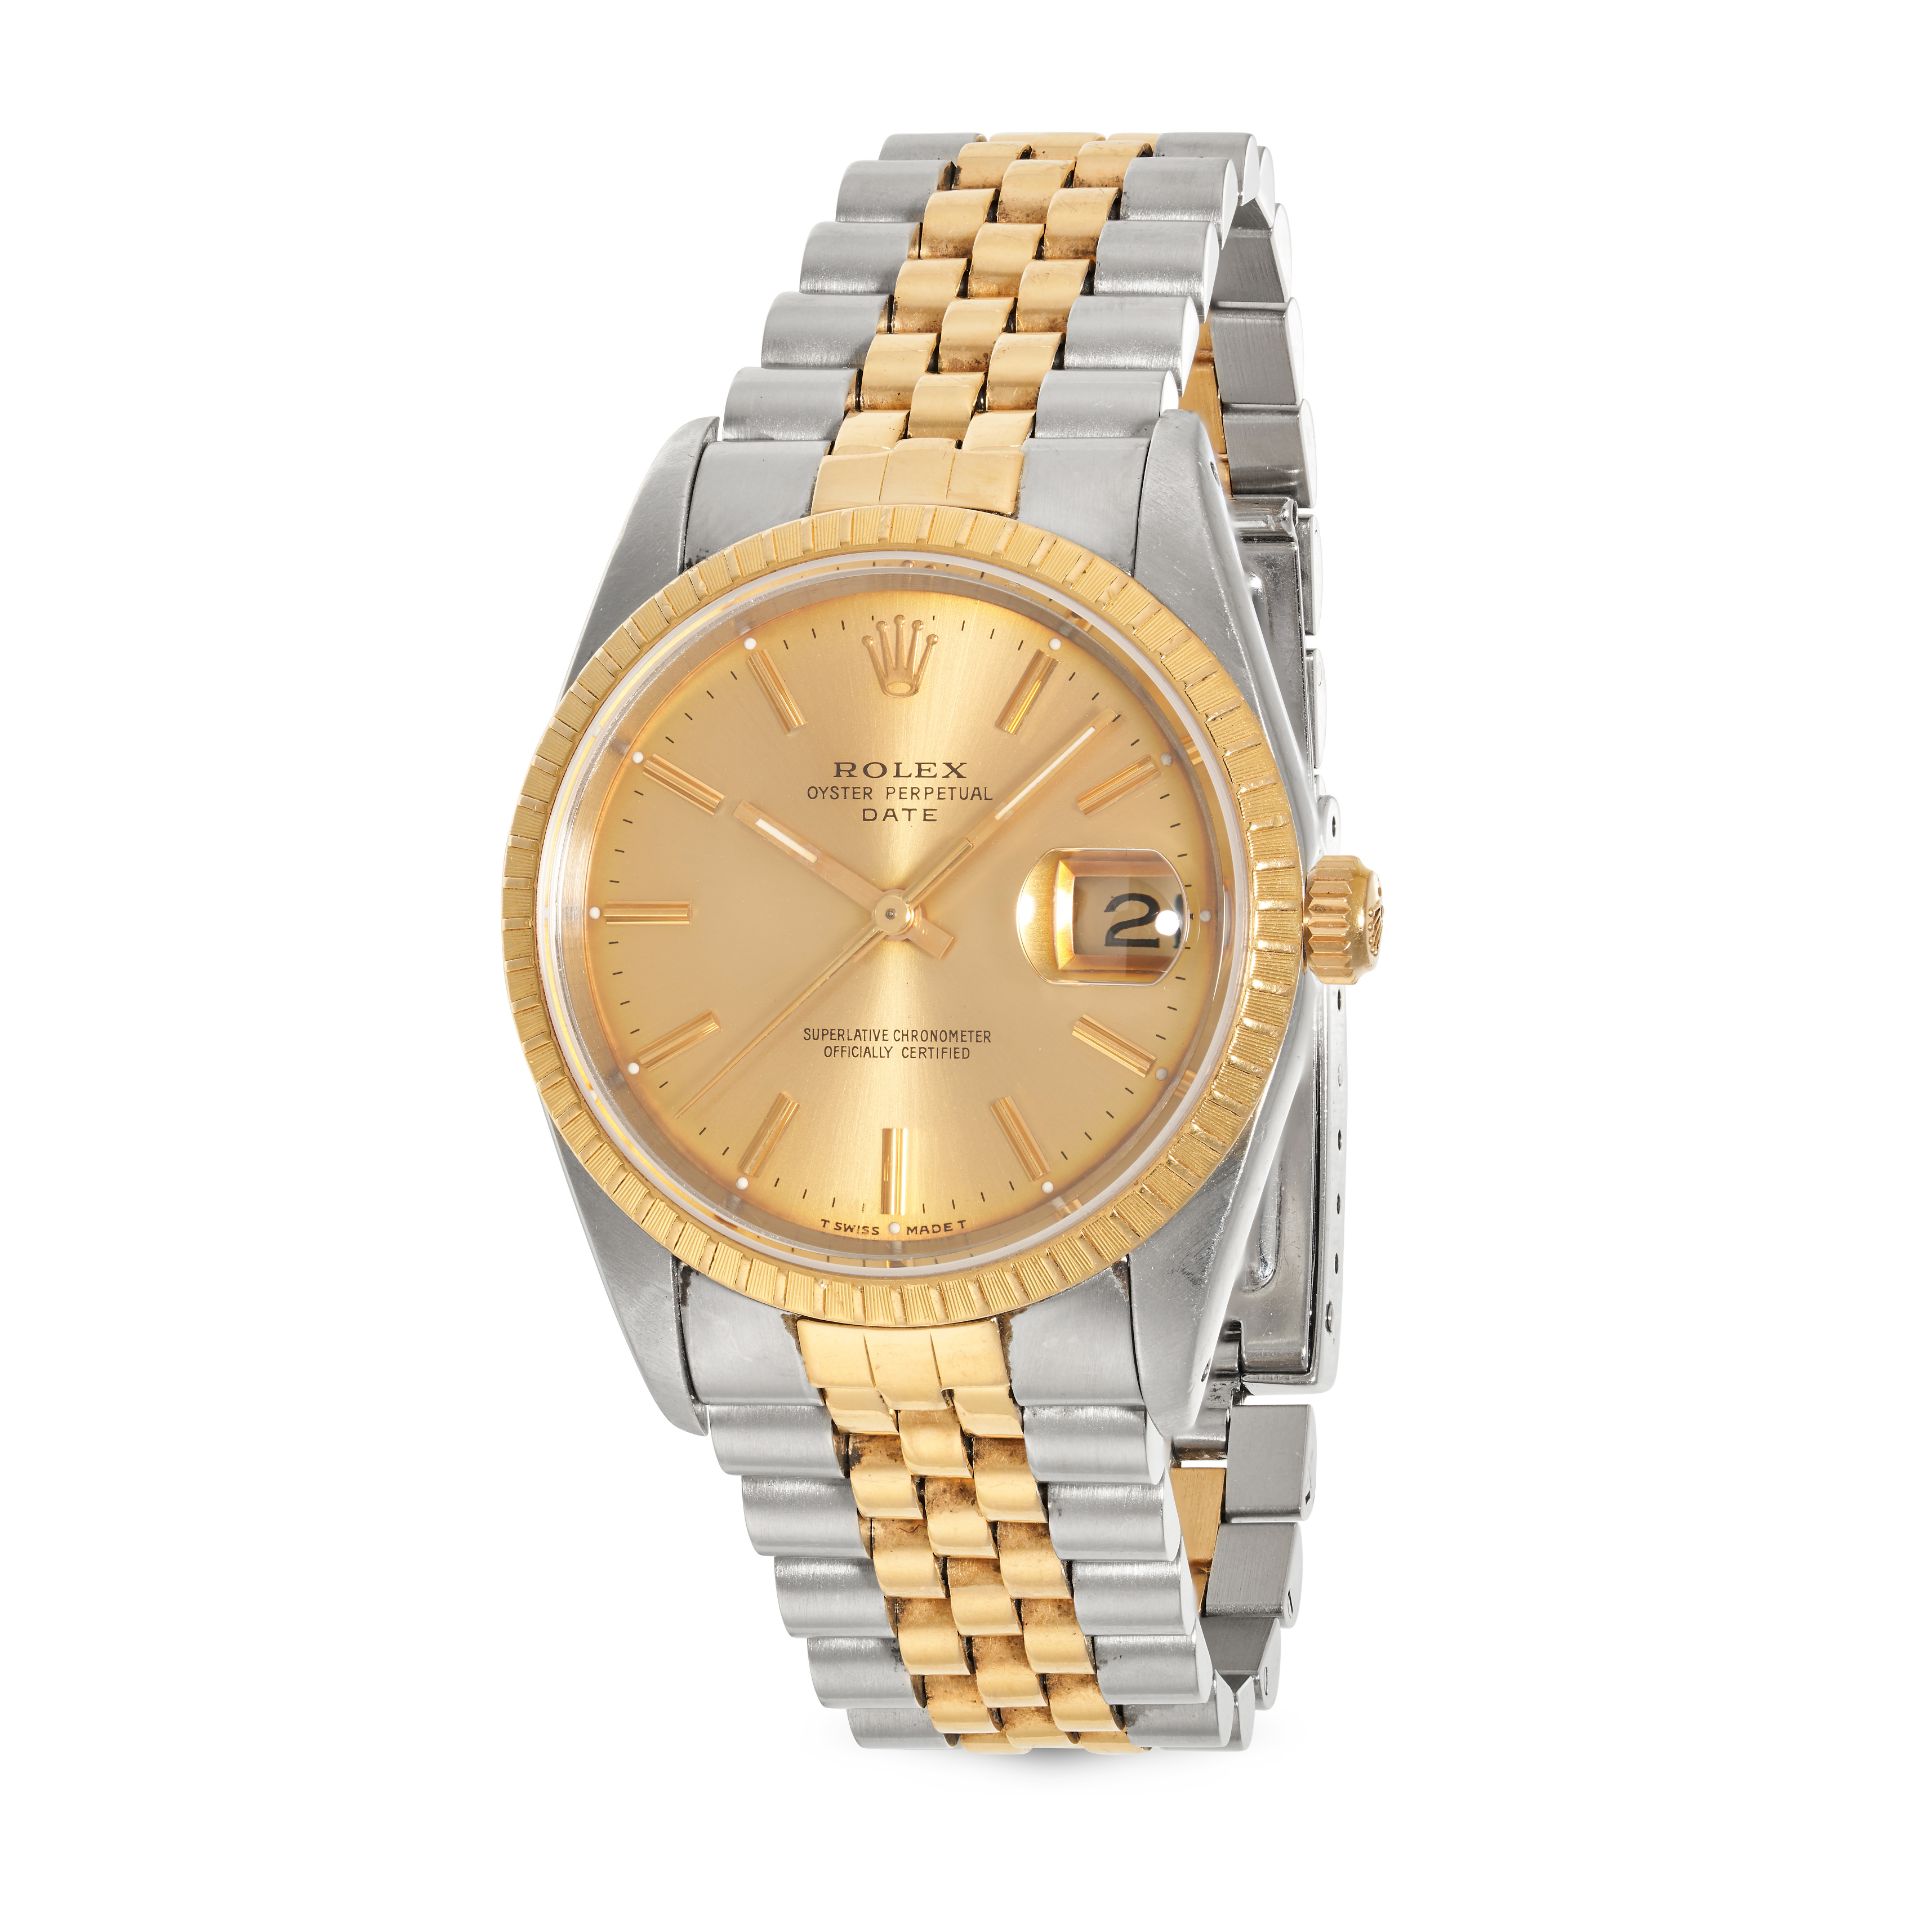 ROLEX - A BIMETAL ROLEX OYSTER PERPETUAL DATE WRISTWATCH in stainless steel and yellow gold, 5223...